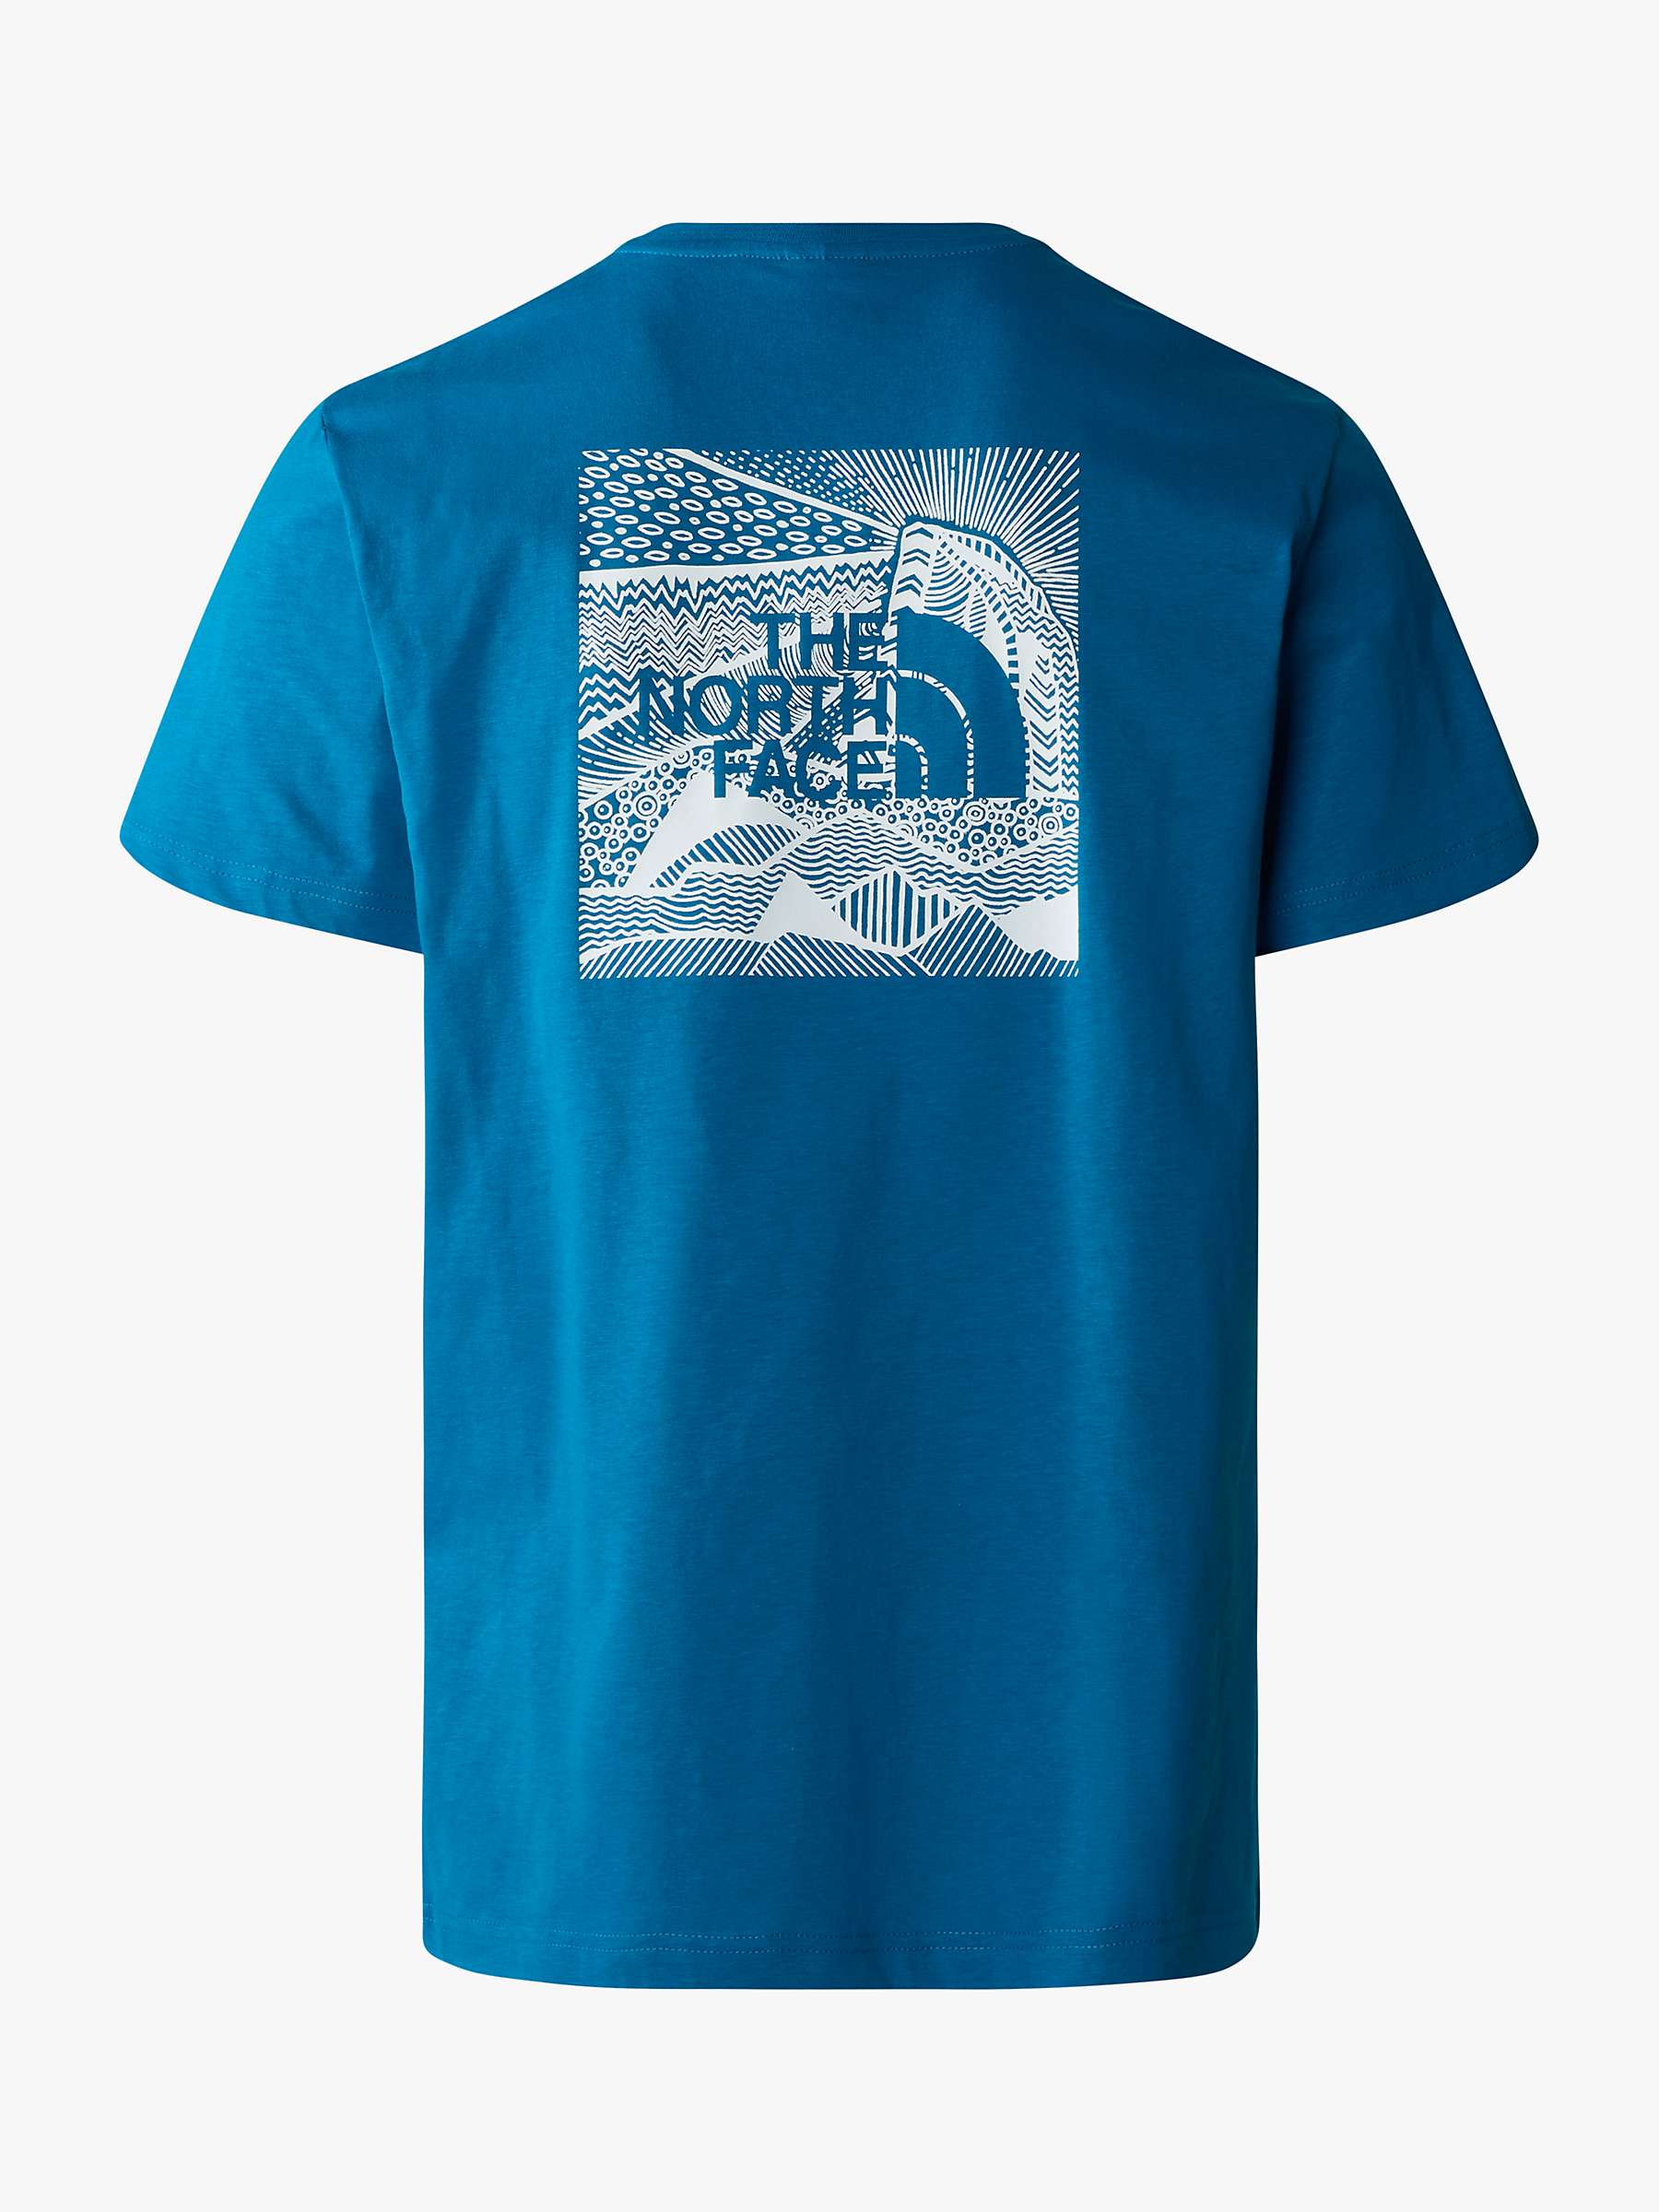 Buy The North Face Waterbased Graphic Short Sleeve T-Shirt, Adriatic Blue Online at johnlewis.com